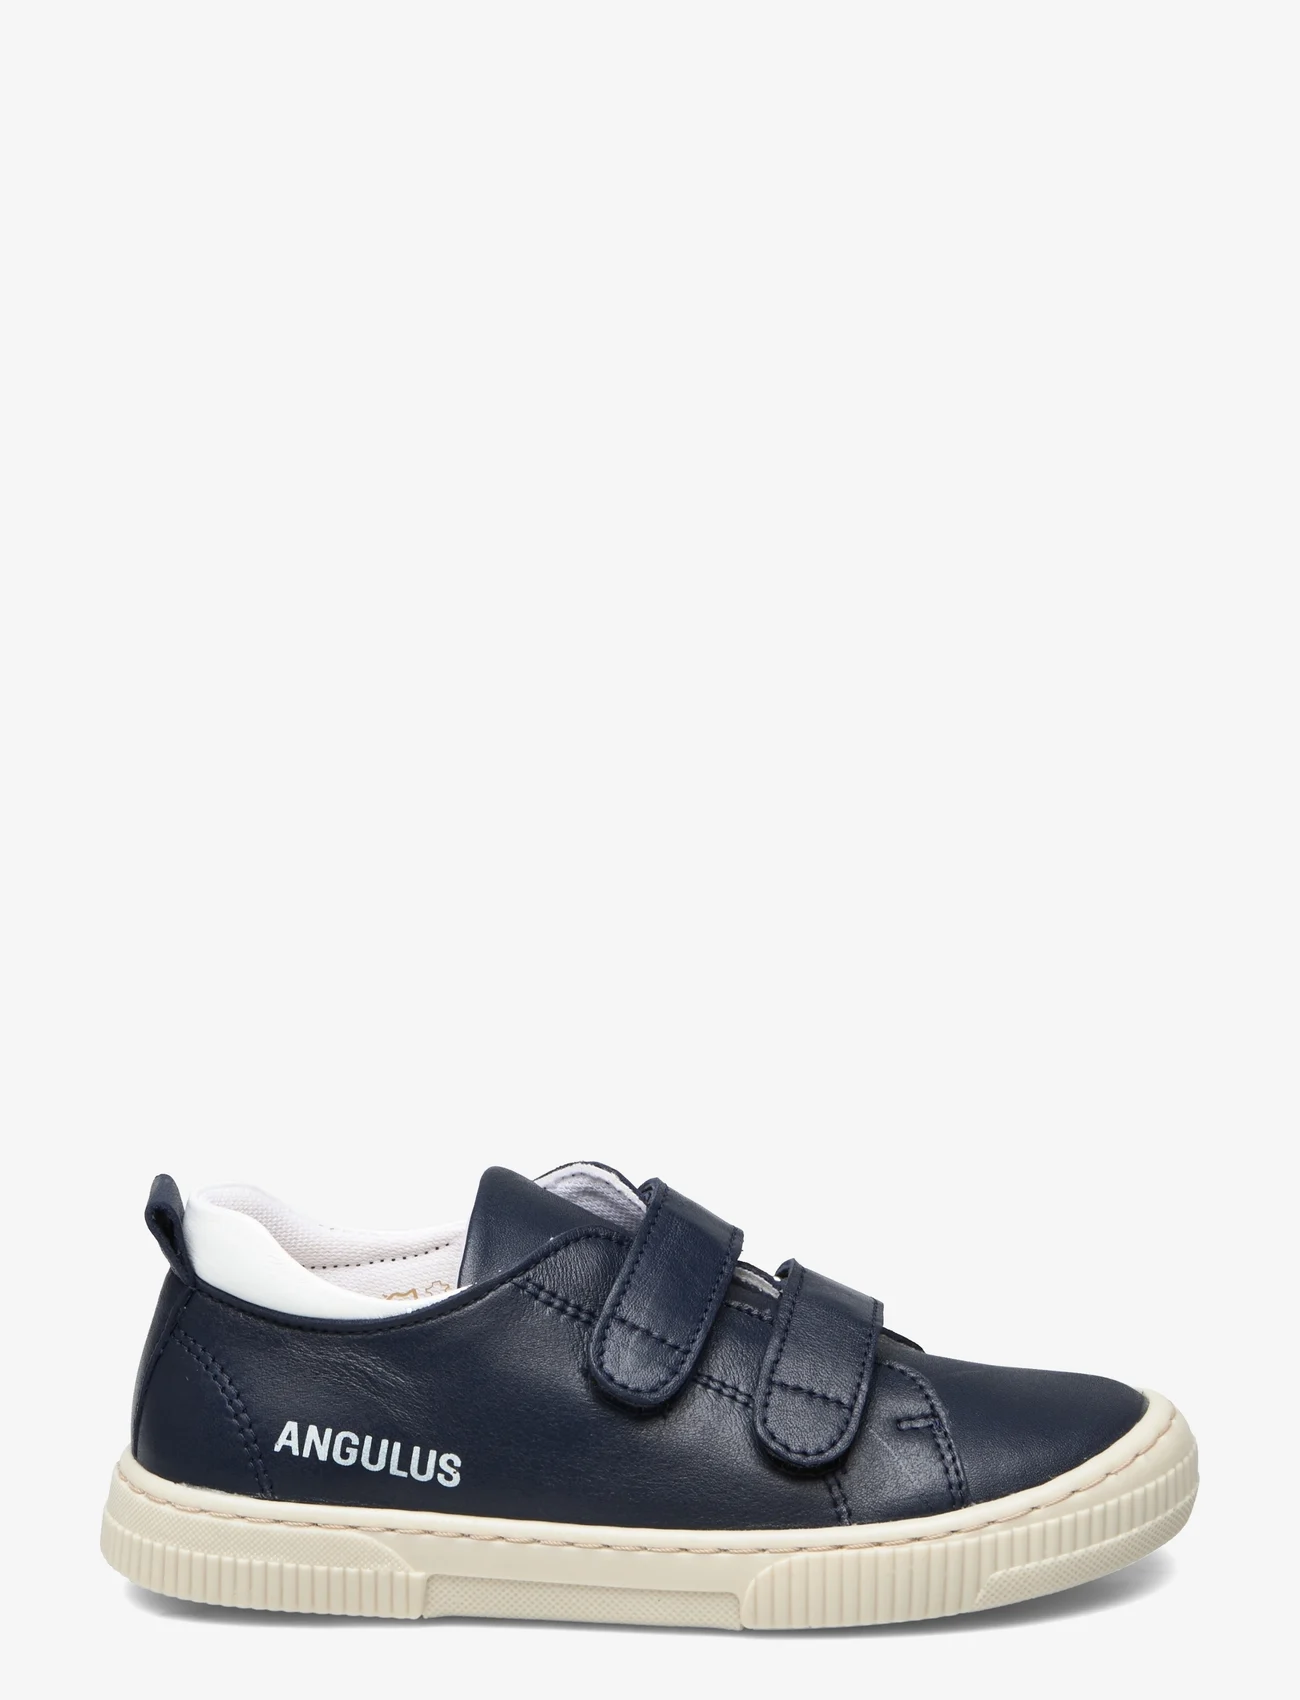 ANGULUS - Shoes - flat - with velcro - summer savings - 2585/1521 navy/white - 1